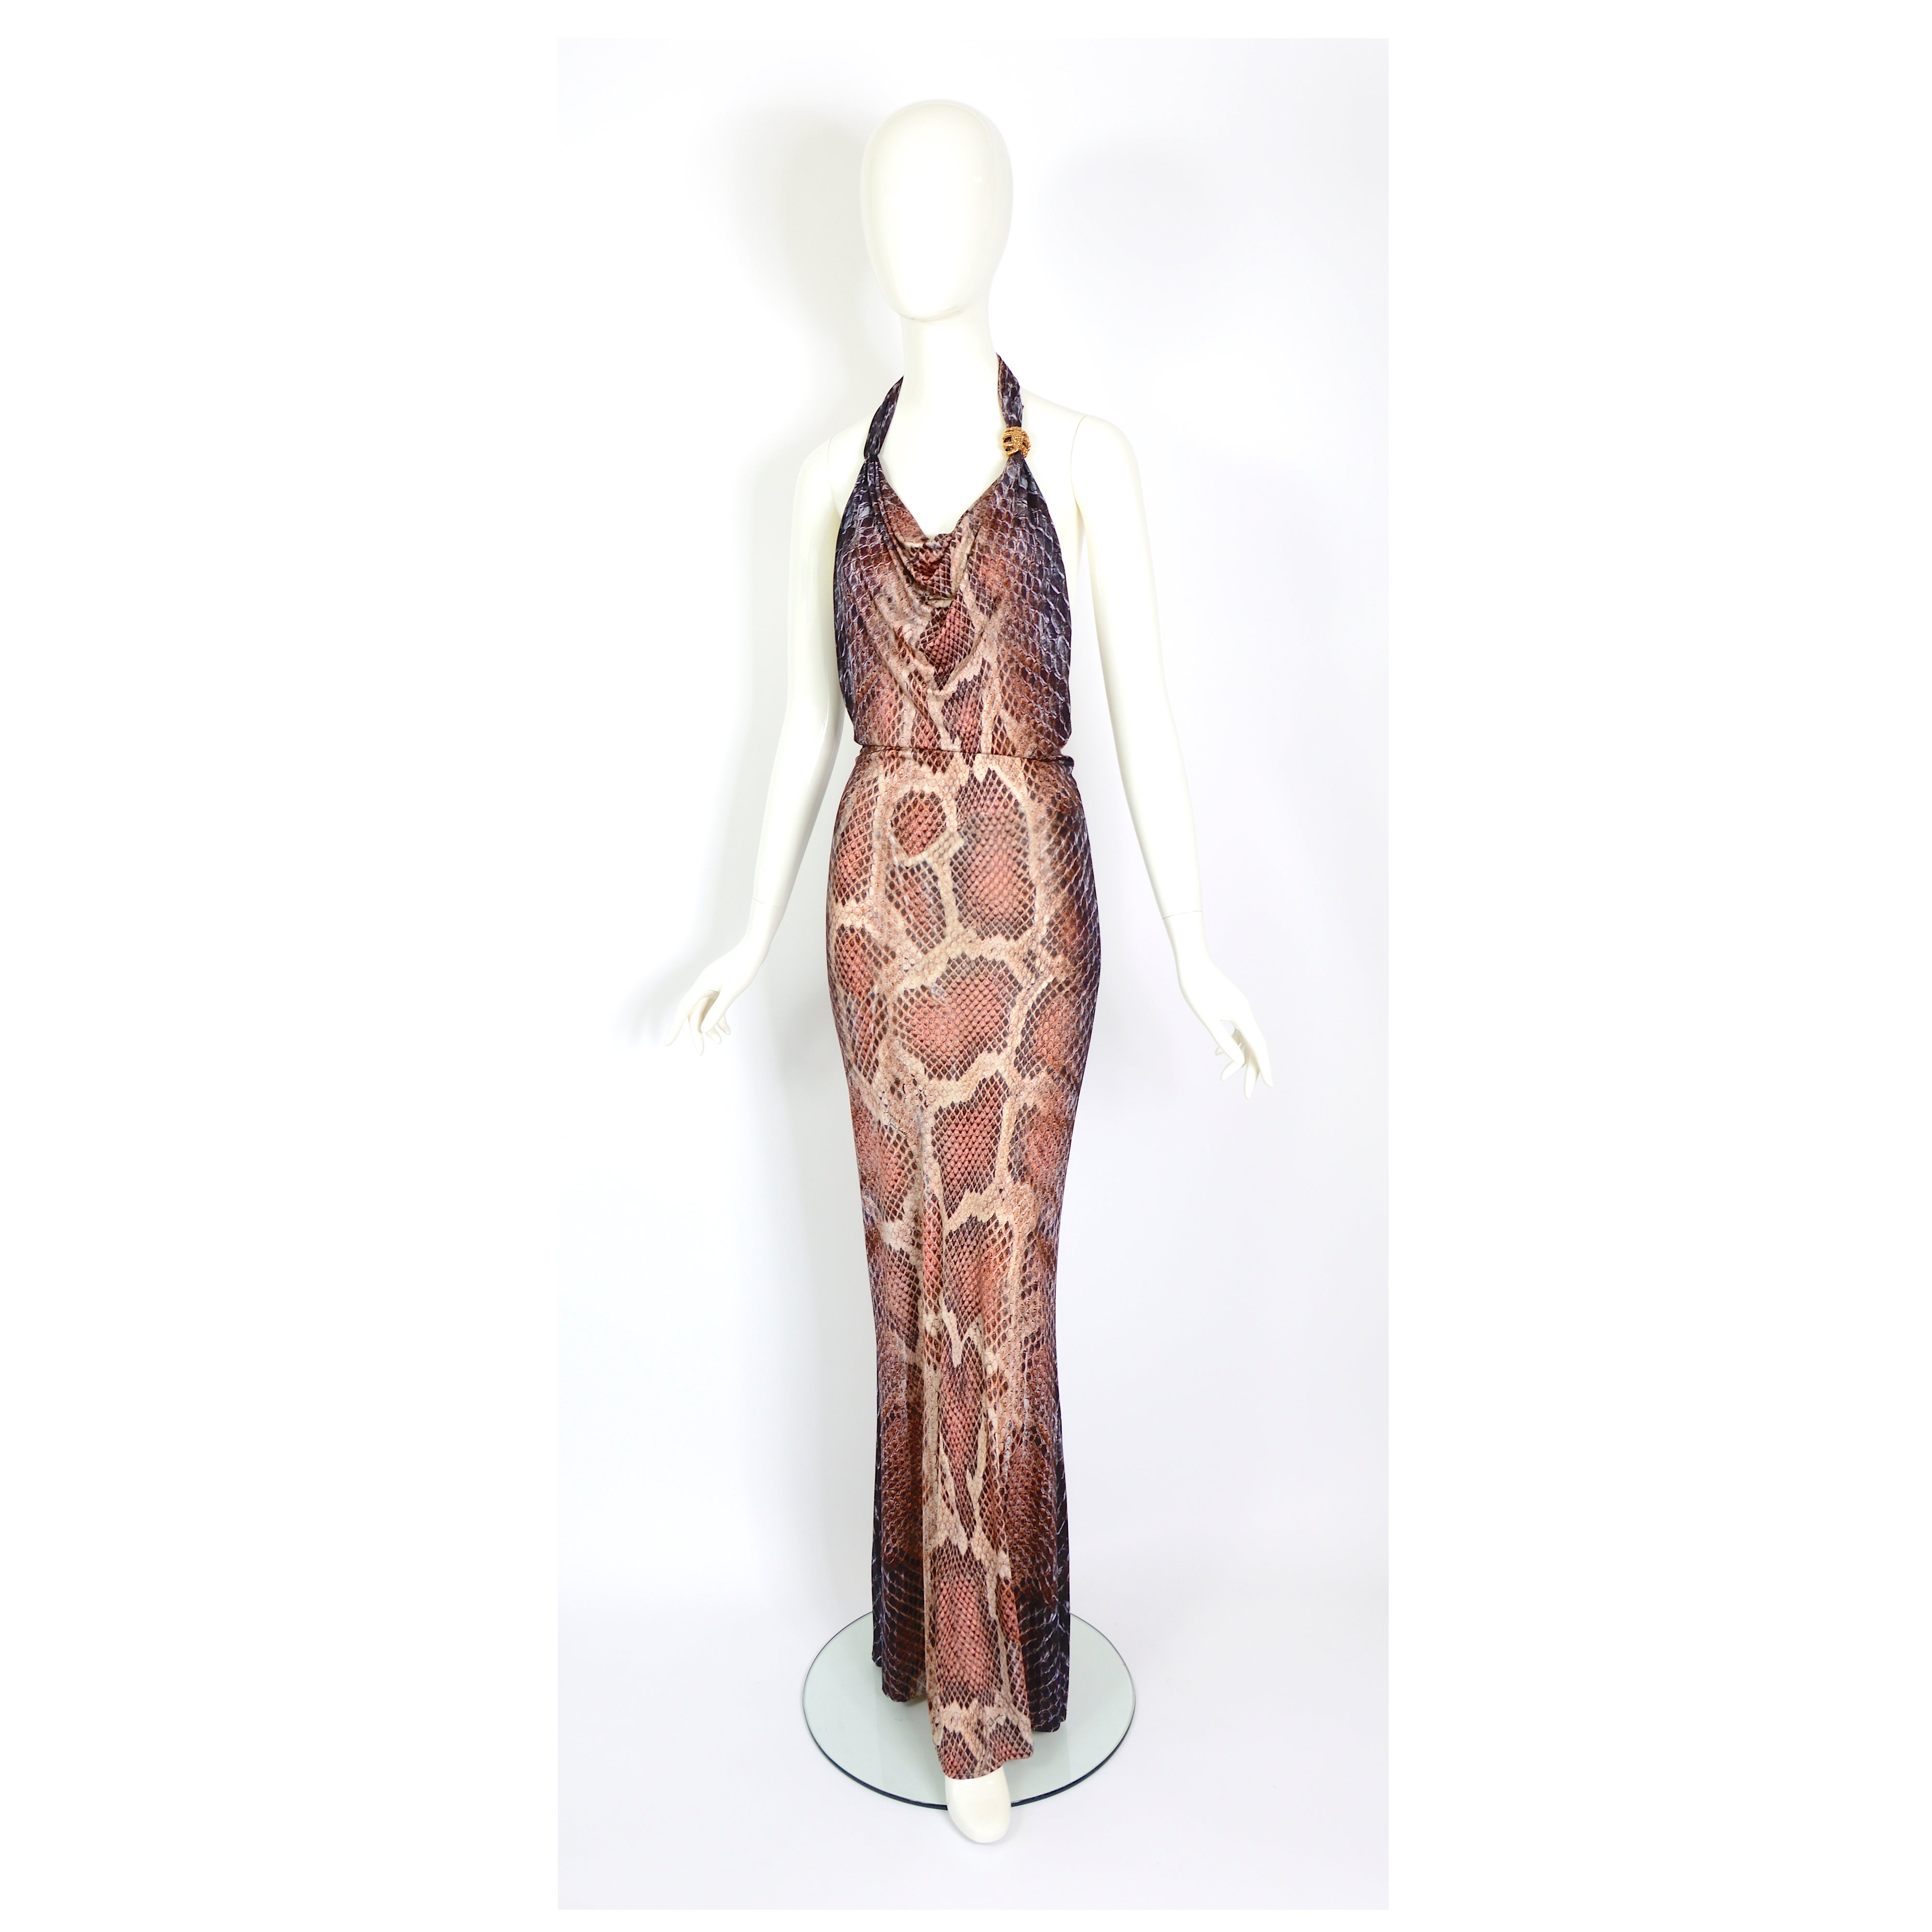 Stunning Vintage Roberto Cavalli early 2000s pink, salmon, brown, and cream phyton print slinky rayon/elastane viscose long dress.
Attached phyton brooch
Italian size 40
Excellent condition